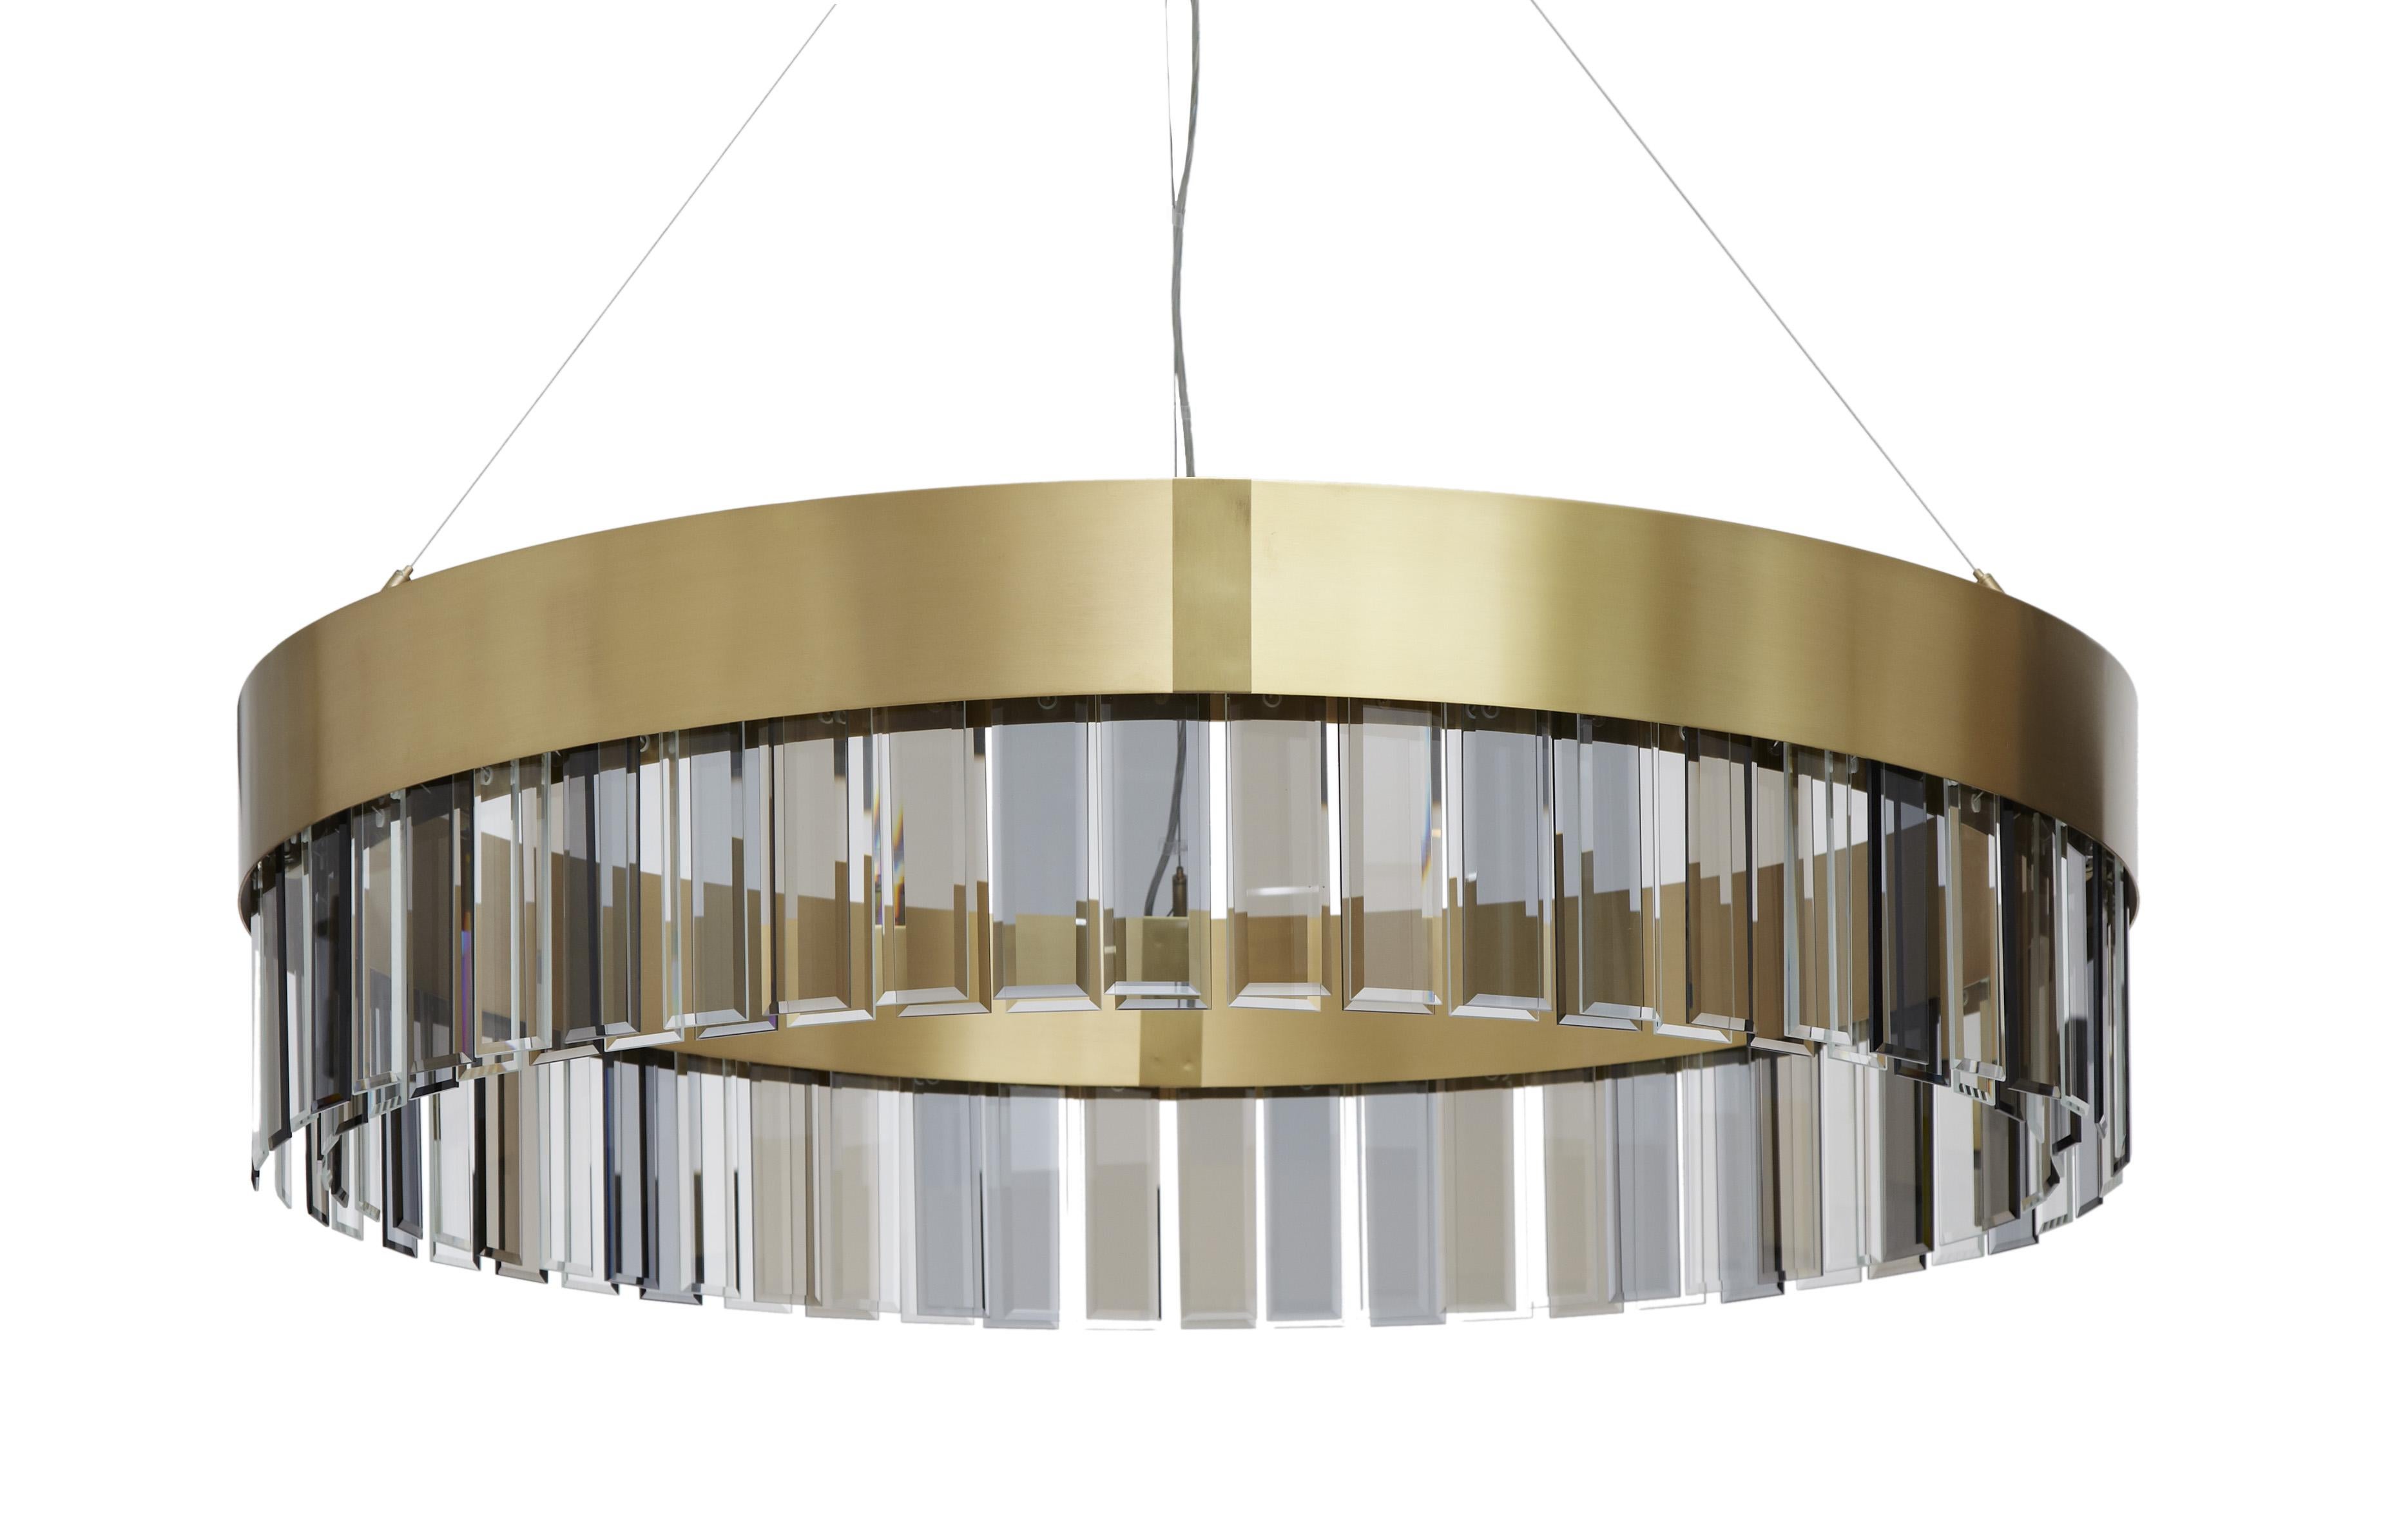 Solaris 1100 pendant by CTO Lighting
Materials: Satin brass with cut glass drops and stainless steel suspension wire/clear flex
Dimensions: H 25 x W 110 cm 

All our lamps can be wired according to each country. If sold to the USA it will be wired